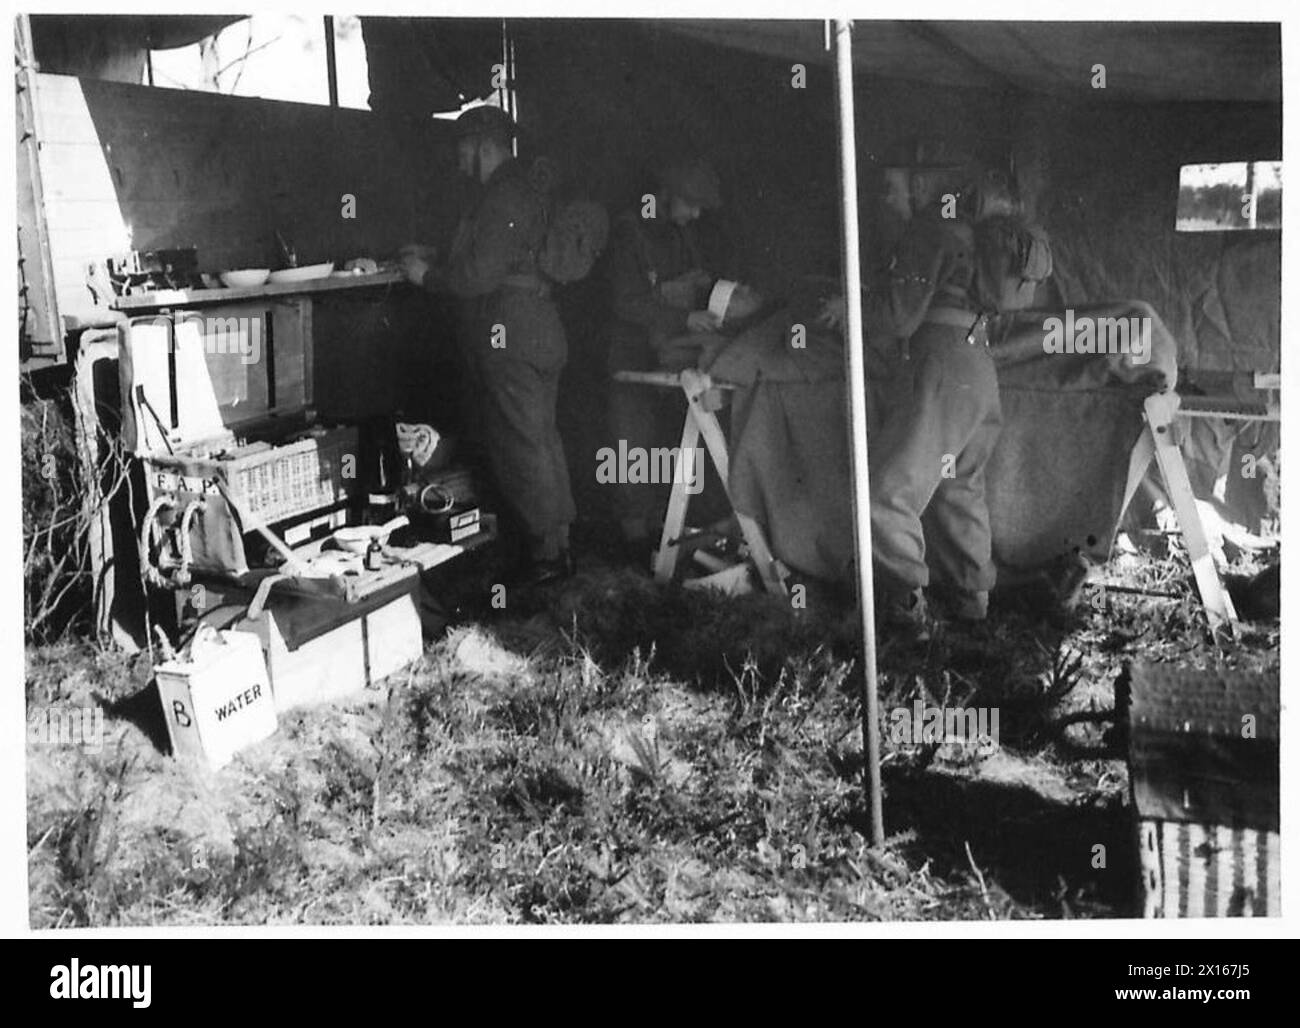 R.A.M.C. LIGHT AMBULANCE UNIT - View of inside of light section showing medical officer and two N.Os working on a casualty British Army Stock Photo